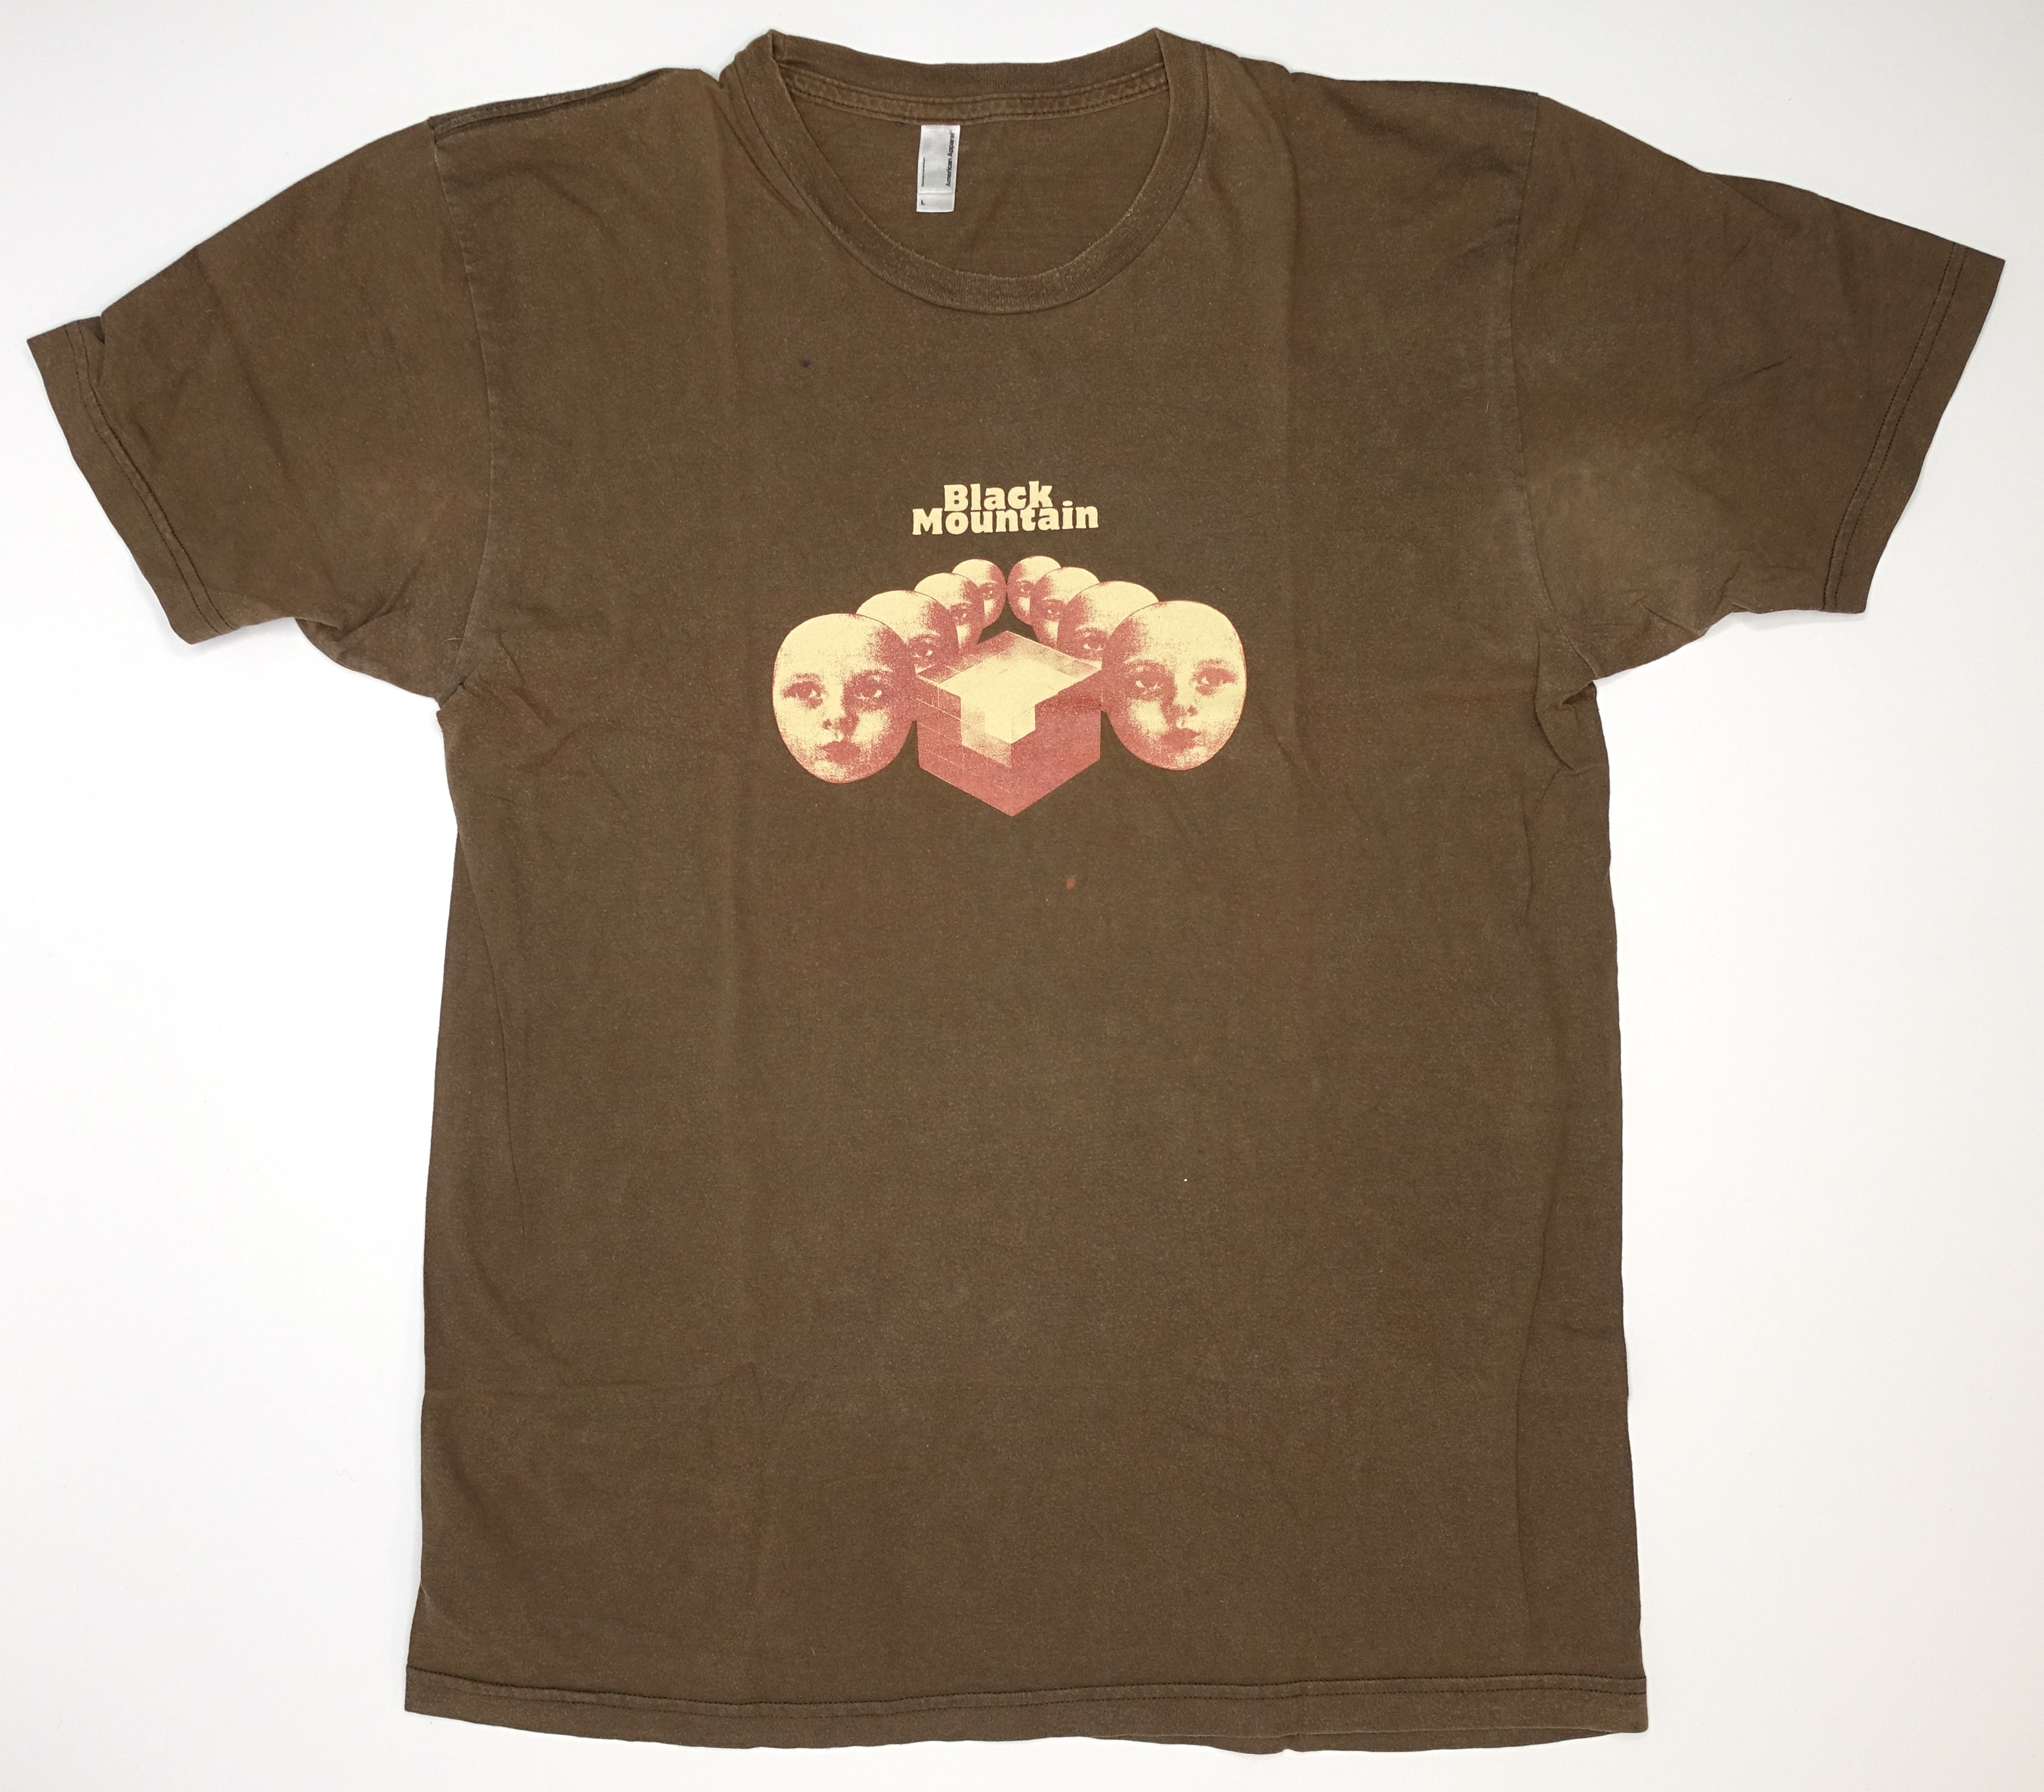 Black Mountain ‎– In The Future 2003 Tour Shirt Size Large